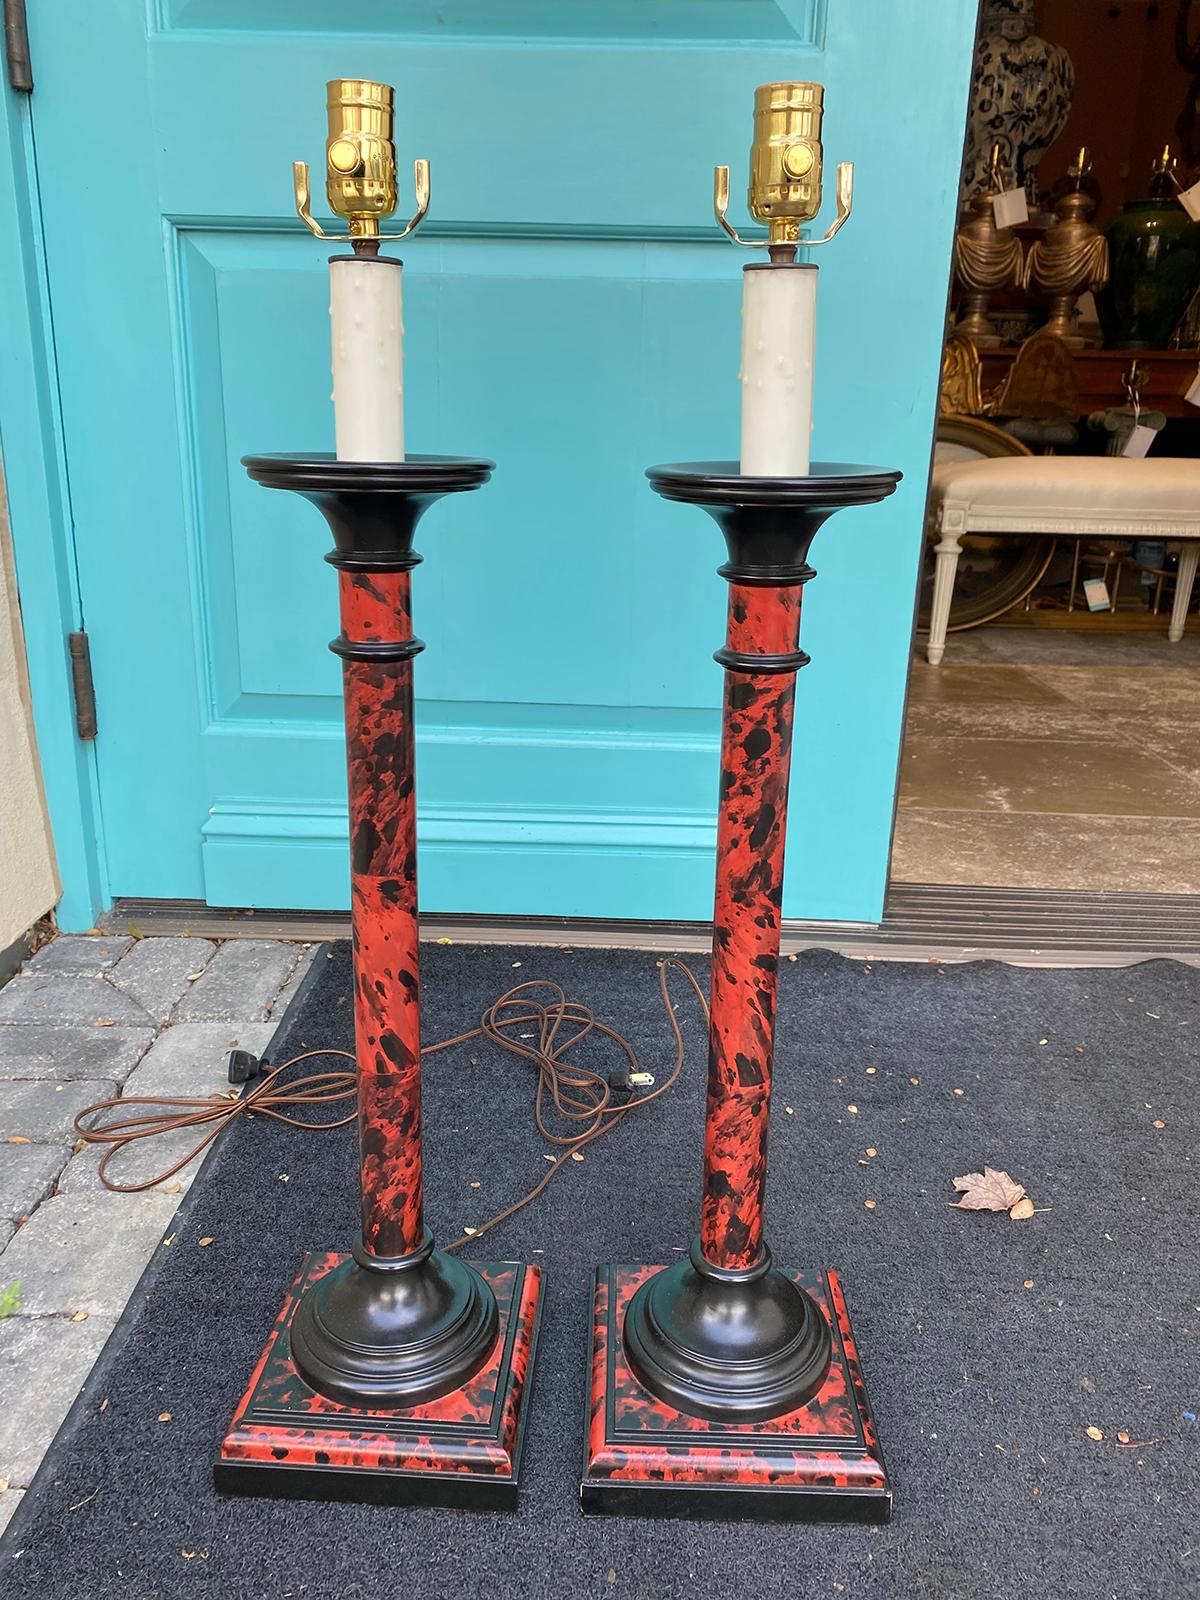 Pair of 20th century faux tortoise shell candlestick lamps
New wiring.